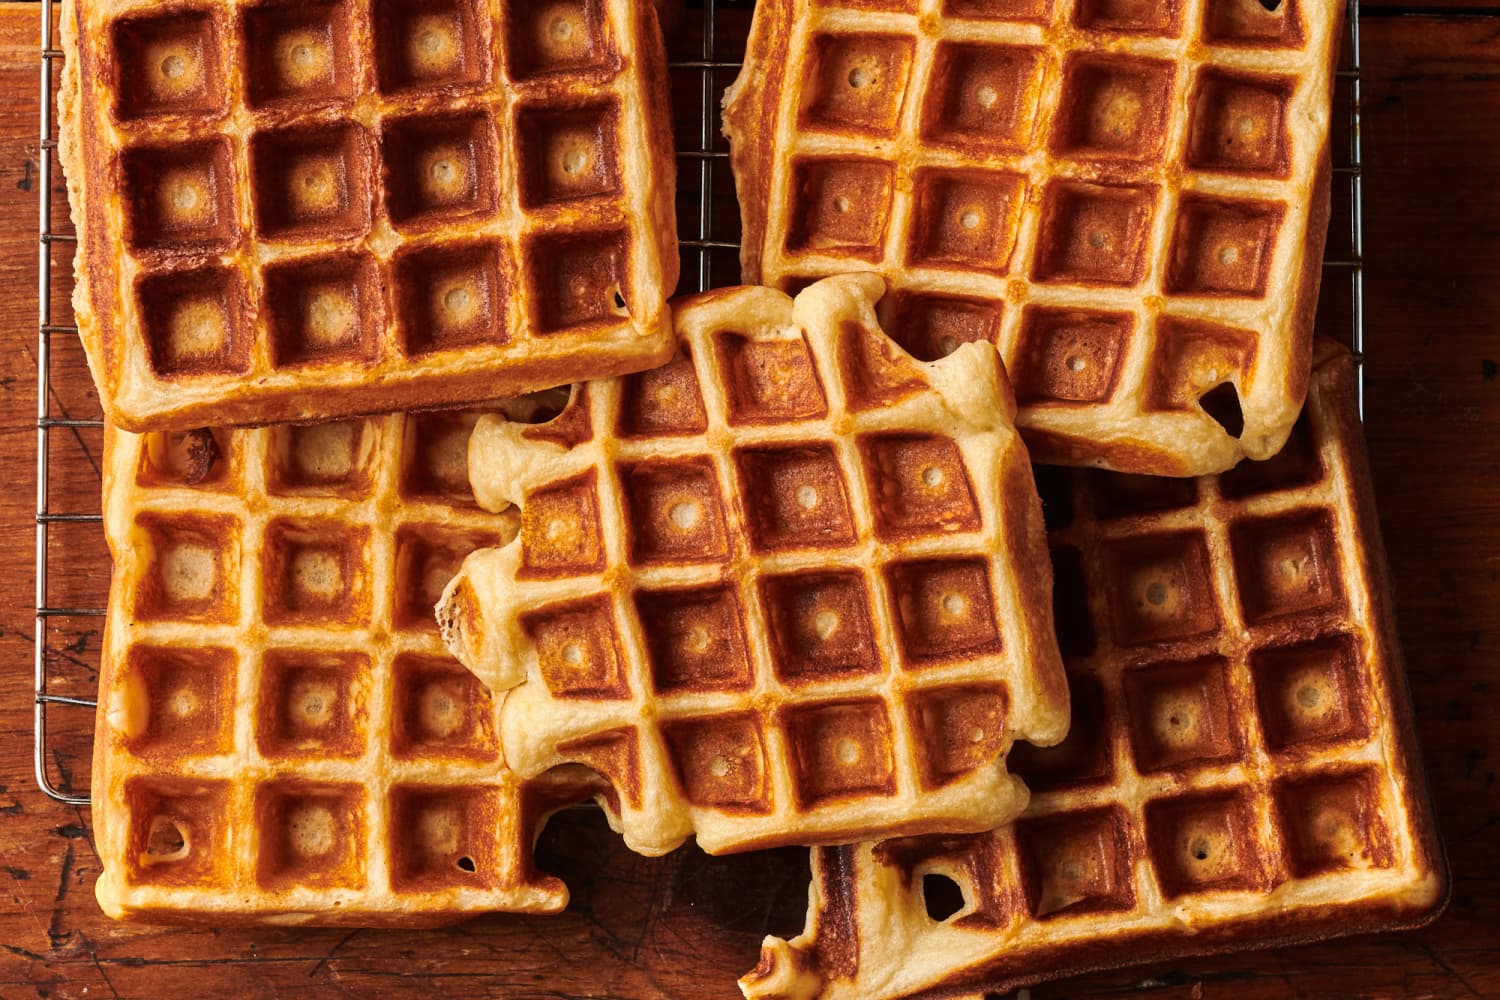 PowerXL Waffle Makers Recalled for Spewing Hot Batter